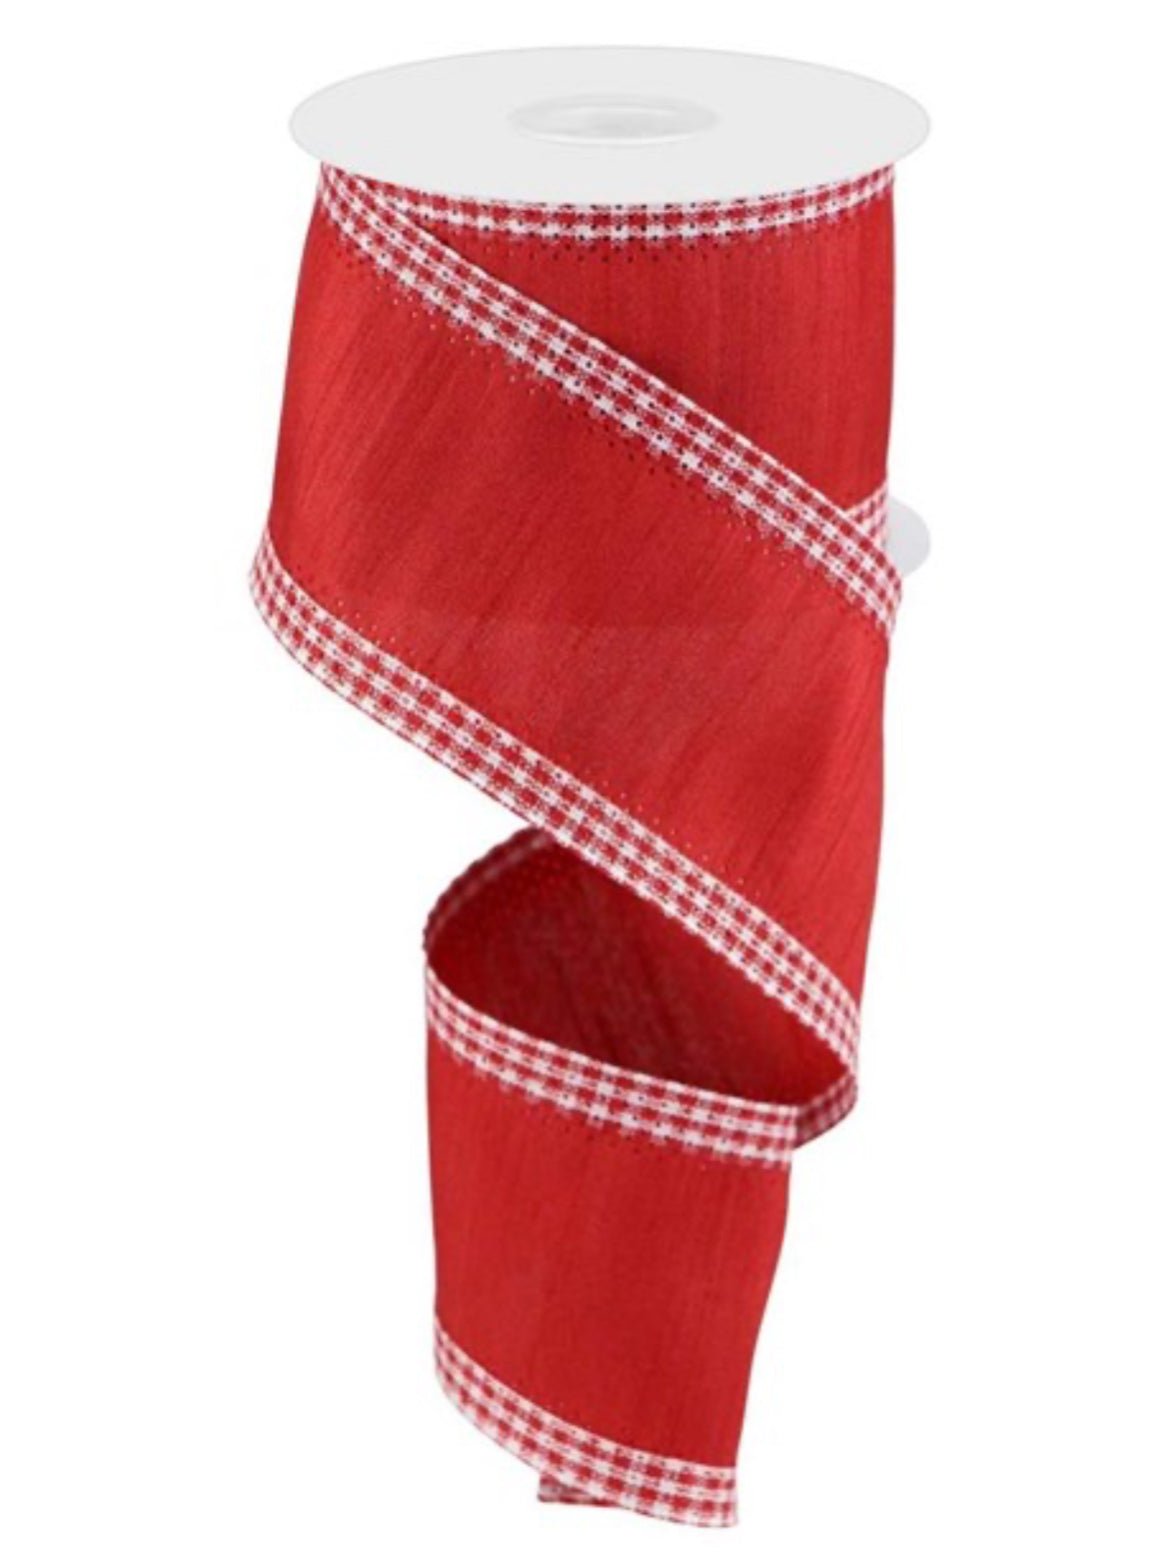 Red dupioni with gingham border wired ribbon 2.5” - Greenery MarketRG08321W7